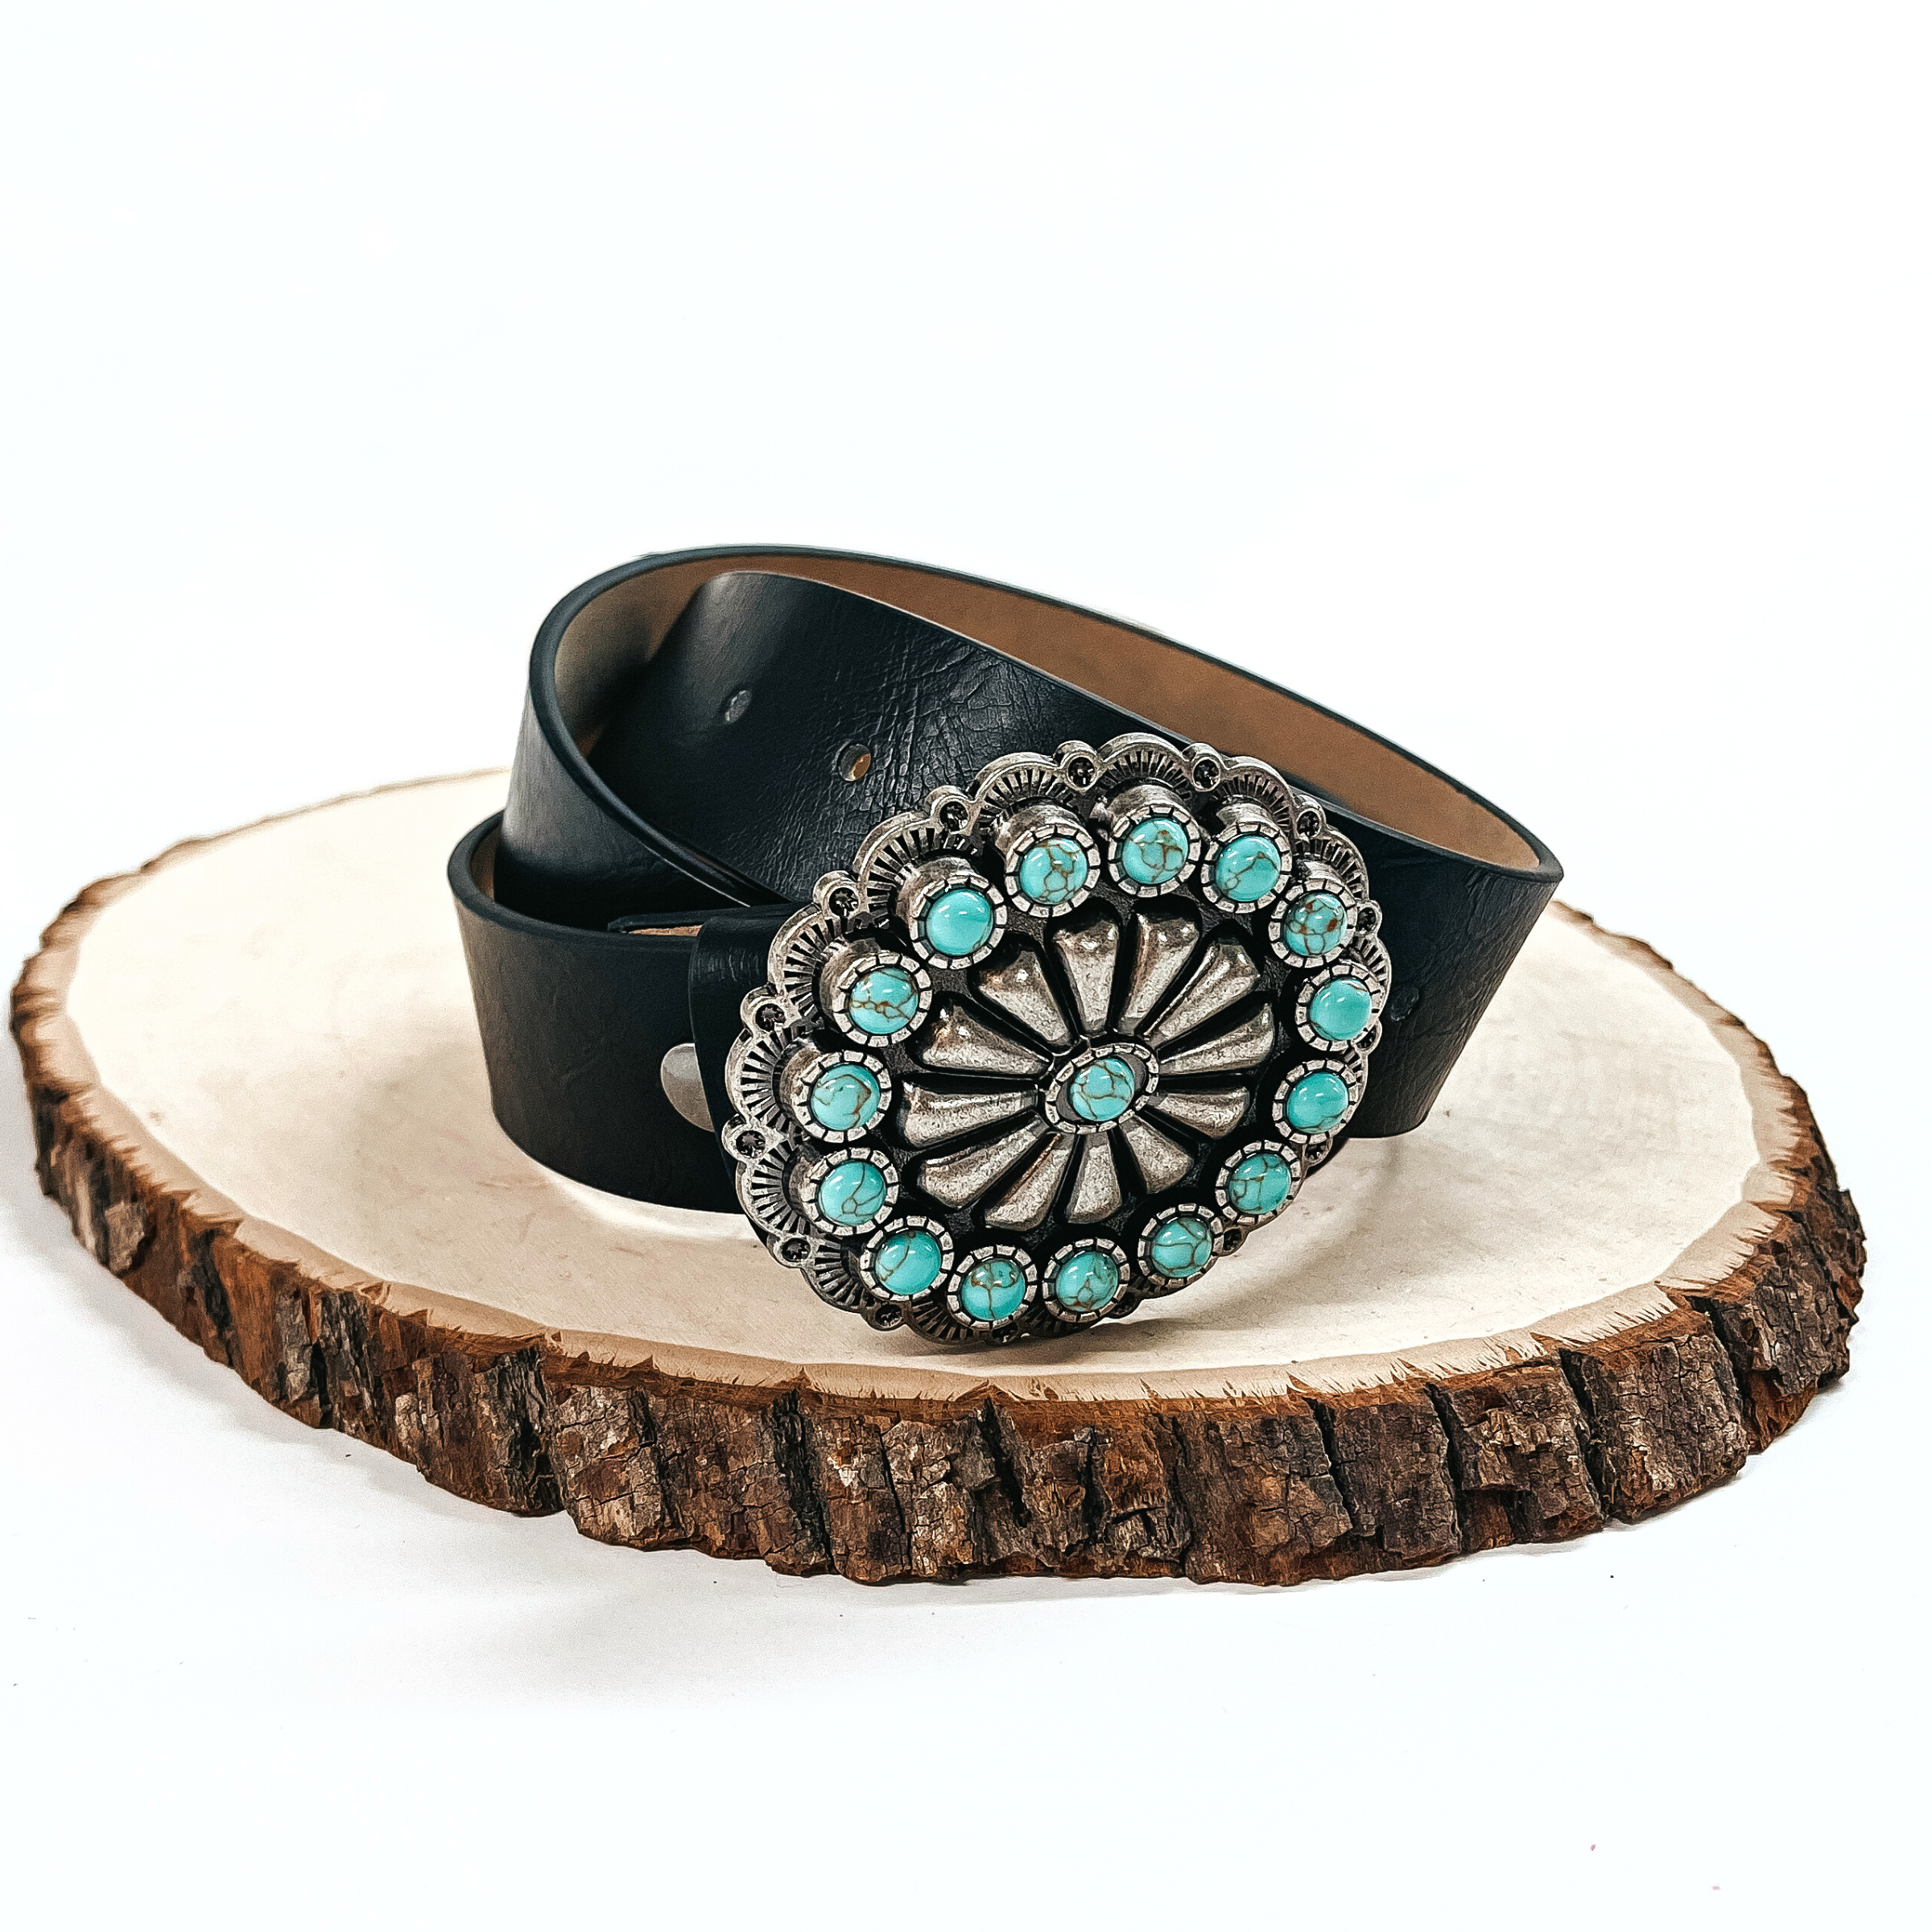 There is a black belt with a silver concho and small turquoise stones all  around. The belt is rolled up and placed on a slab of wood on a white  background.